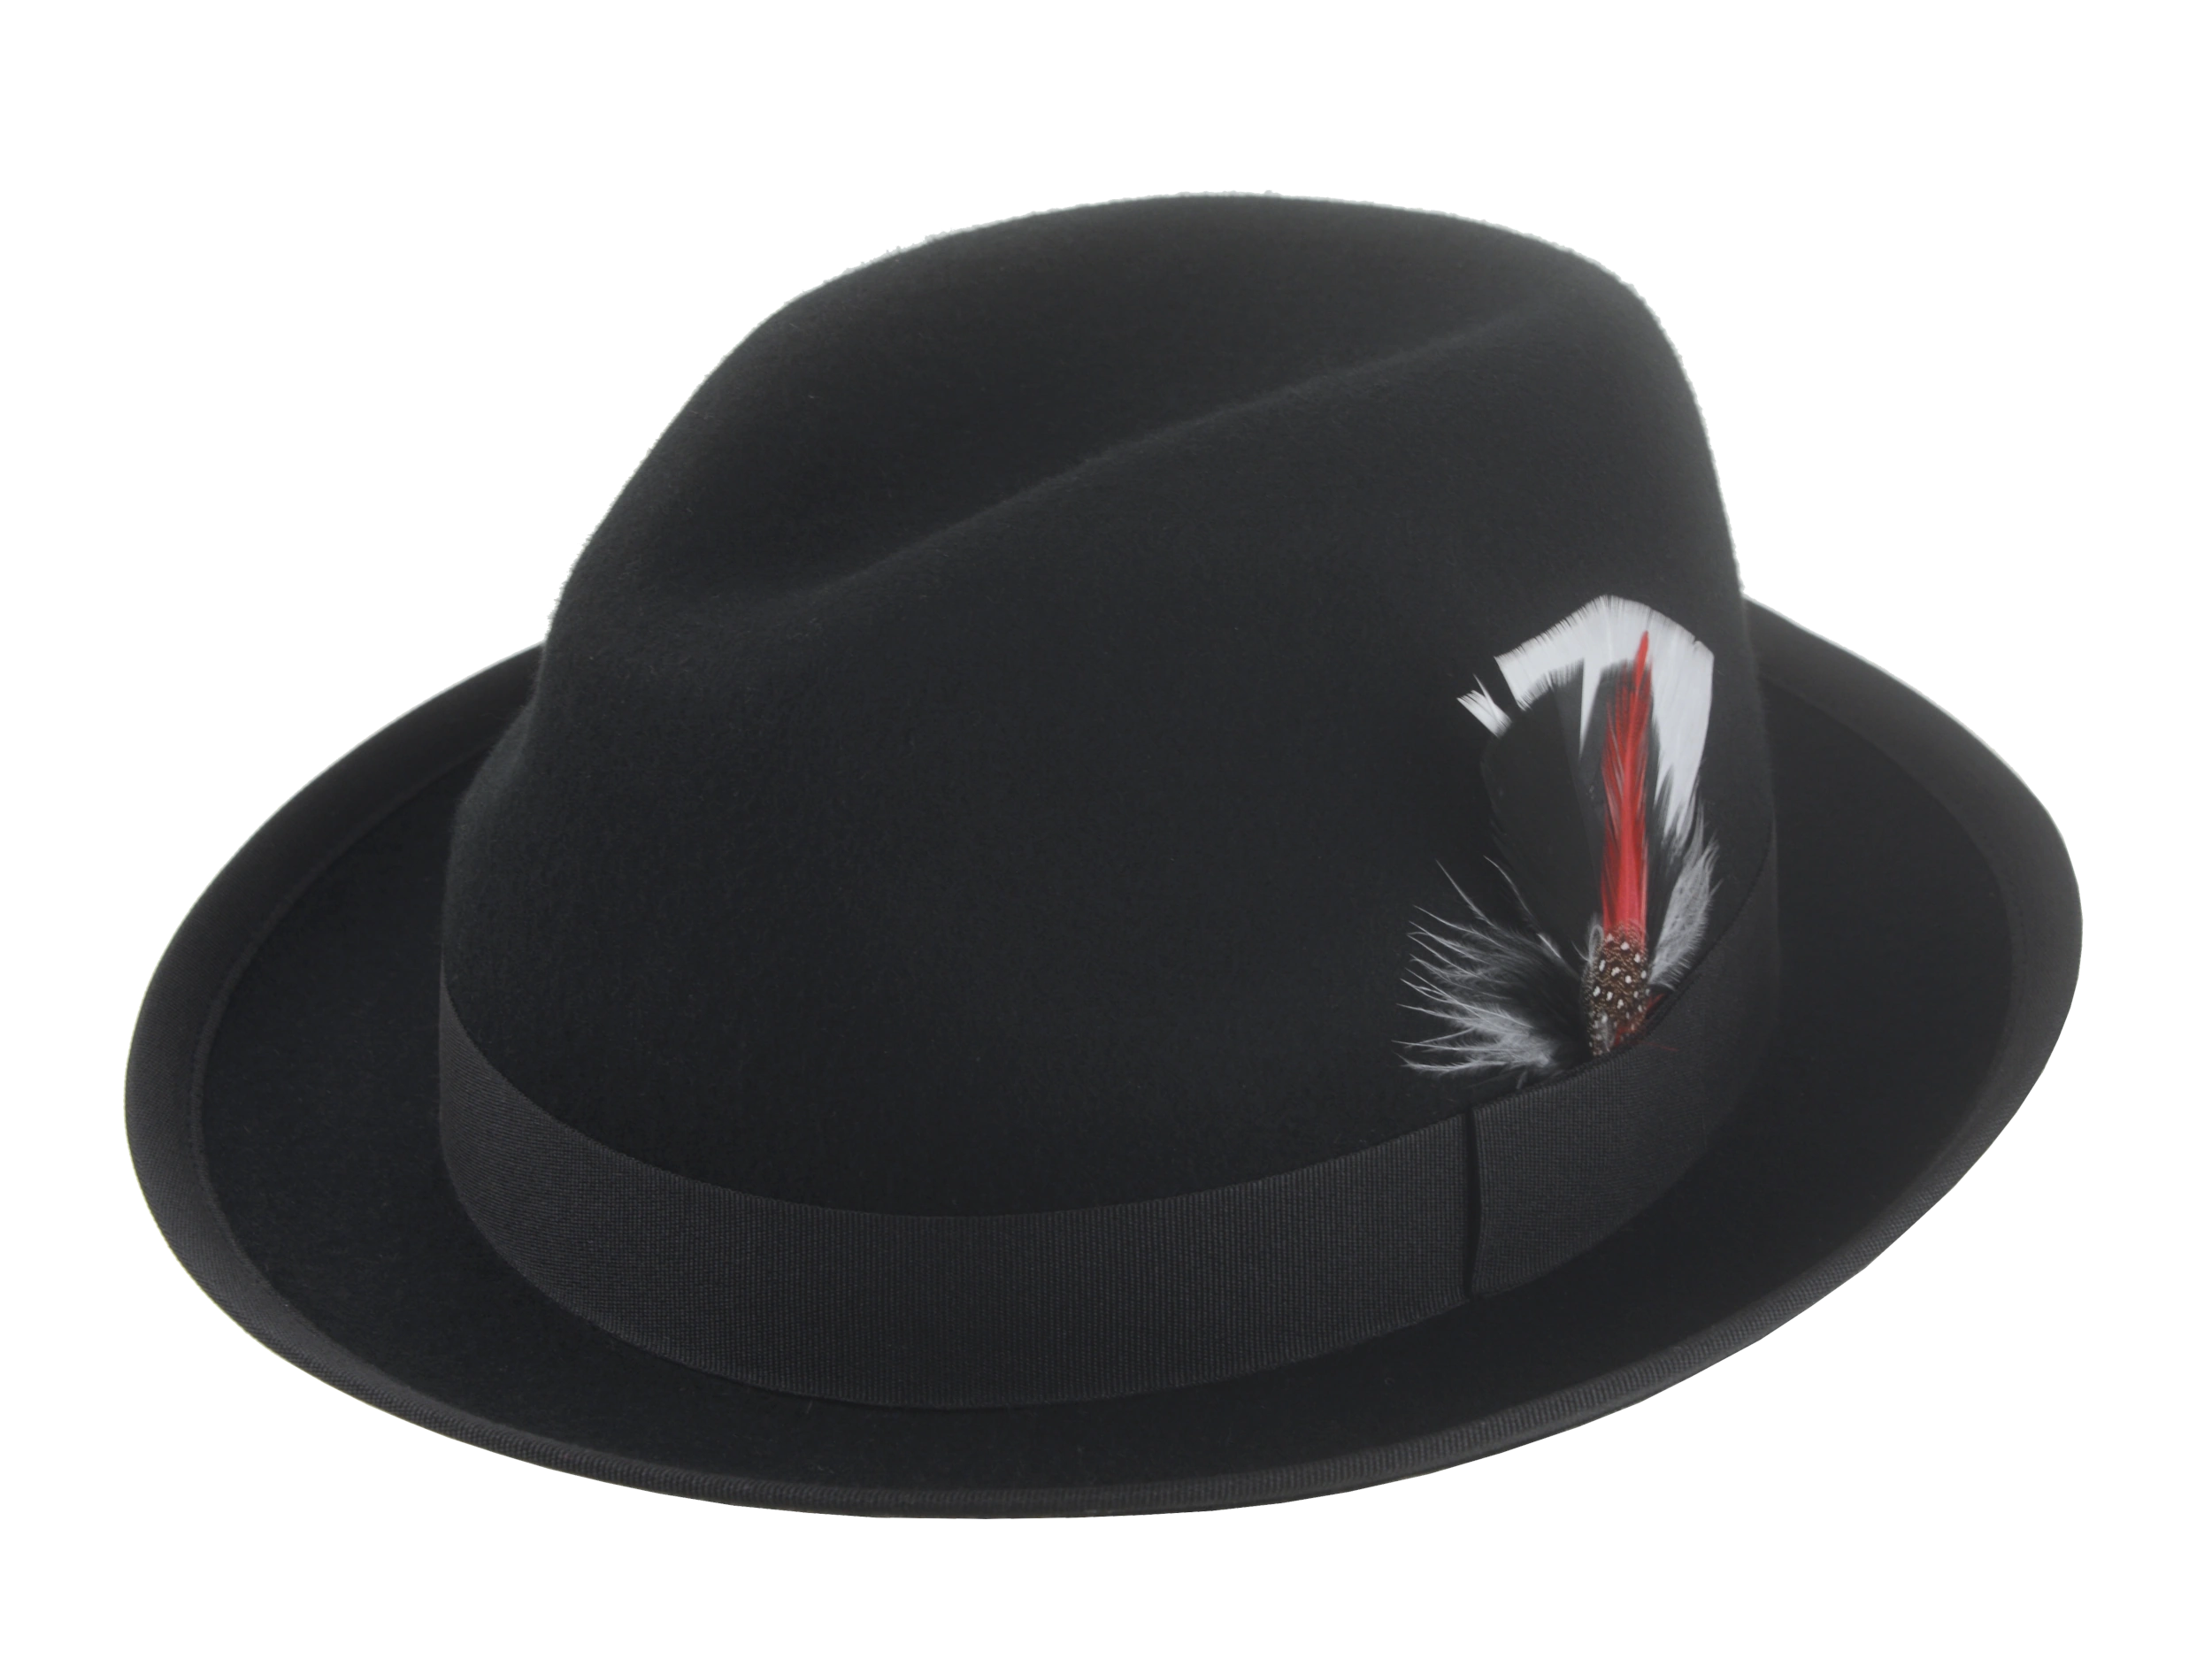 The Crab - Premium Wool Felt Trilby Fedora For Men or Women with Feather in Black White and Red Color | Agnoulita Quality Custom Hats 1